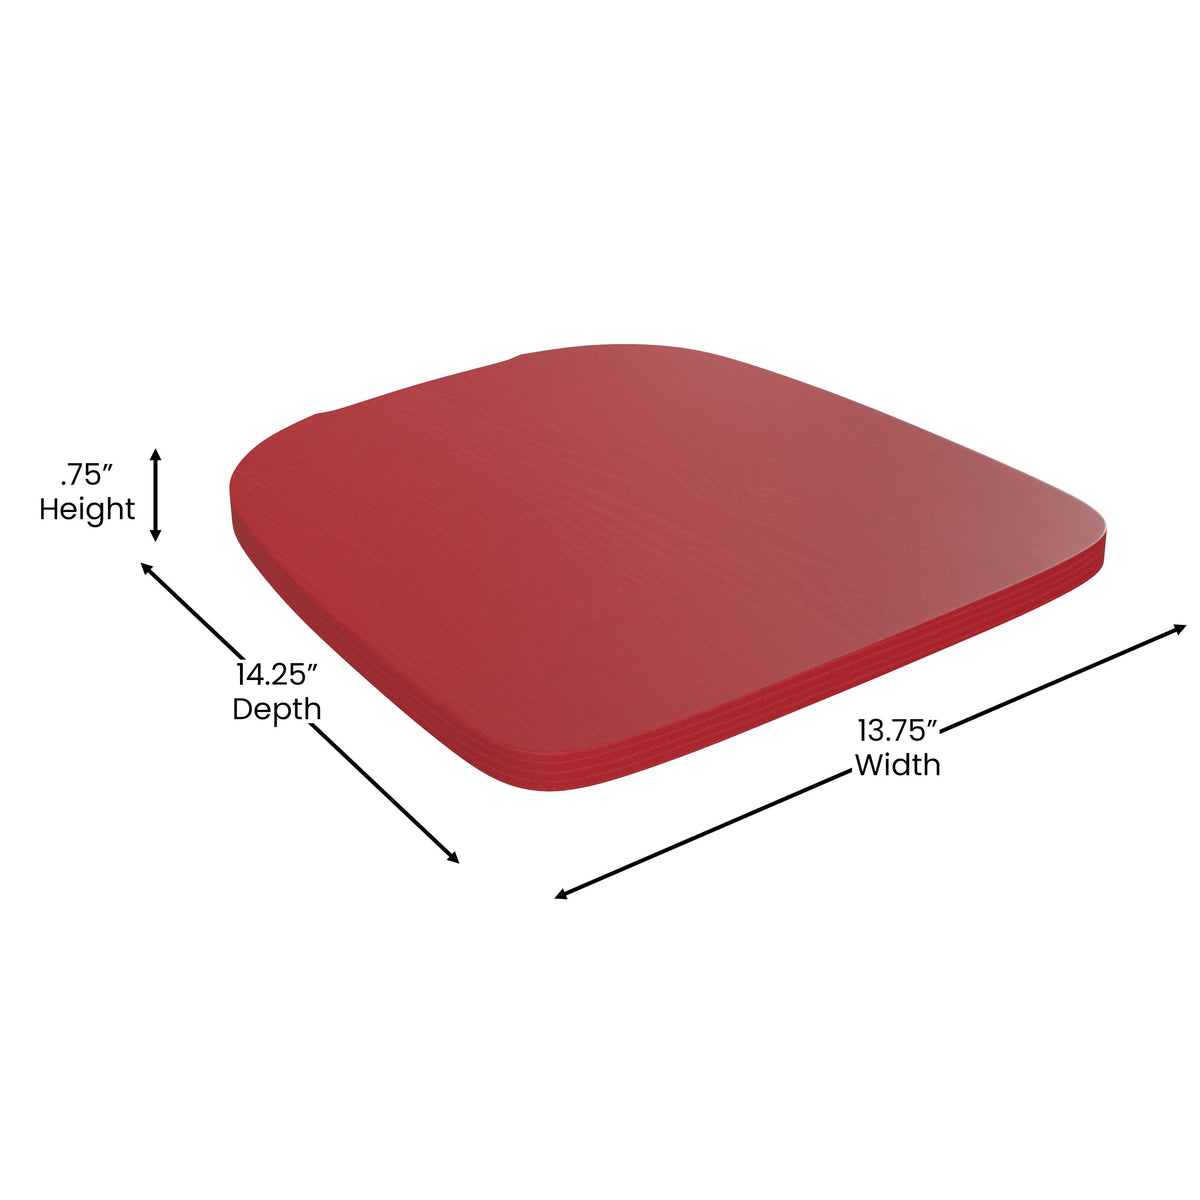 Red |#| All-Weather Polystyrene Seat for Colorful Metal Stools and Chairs - Red